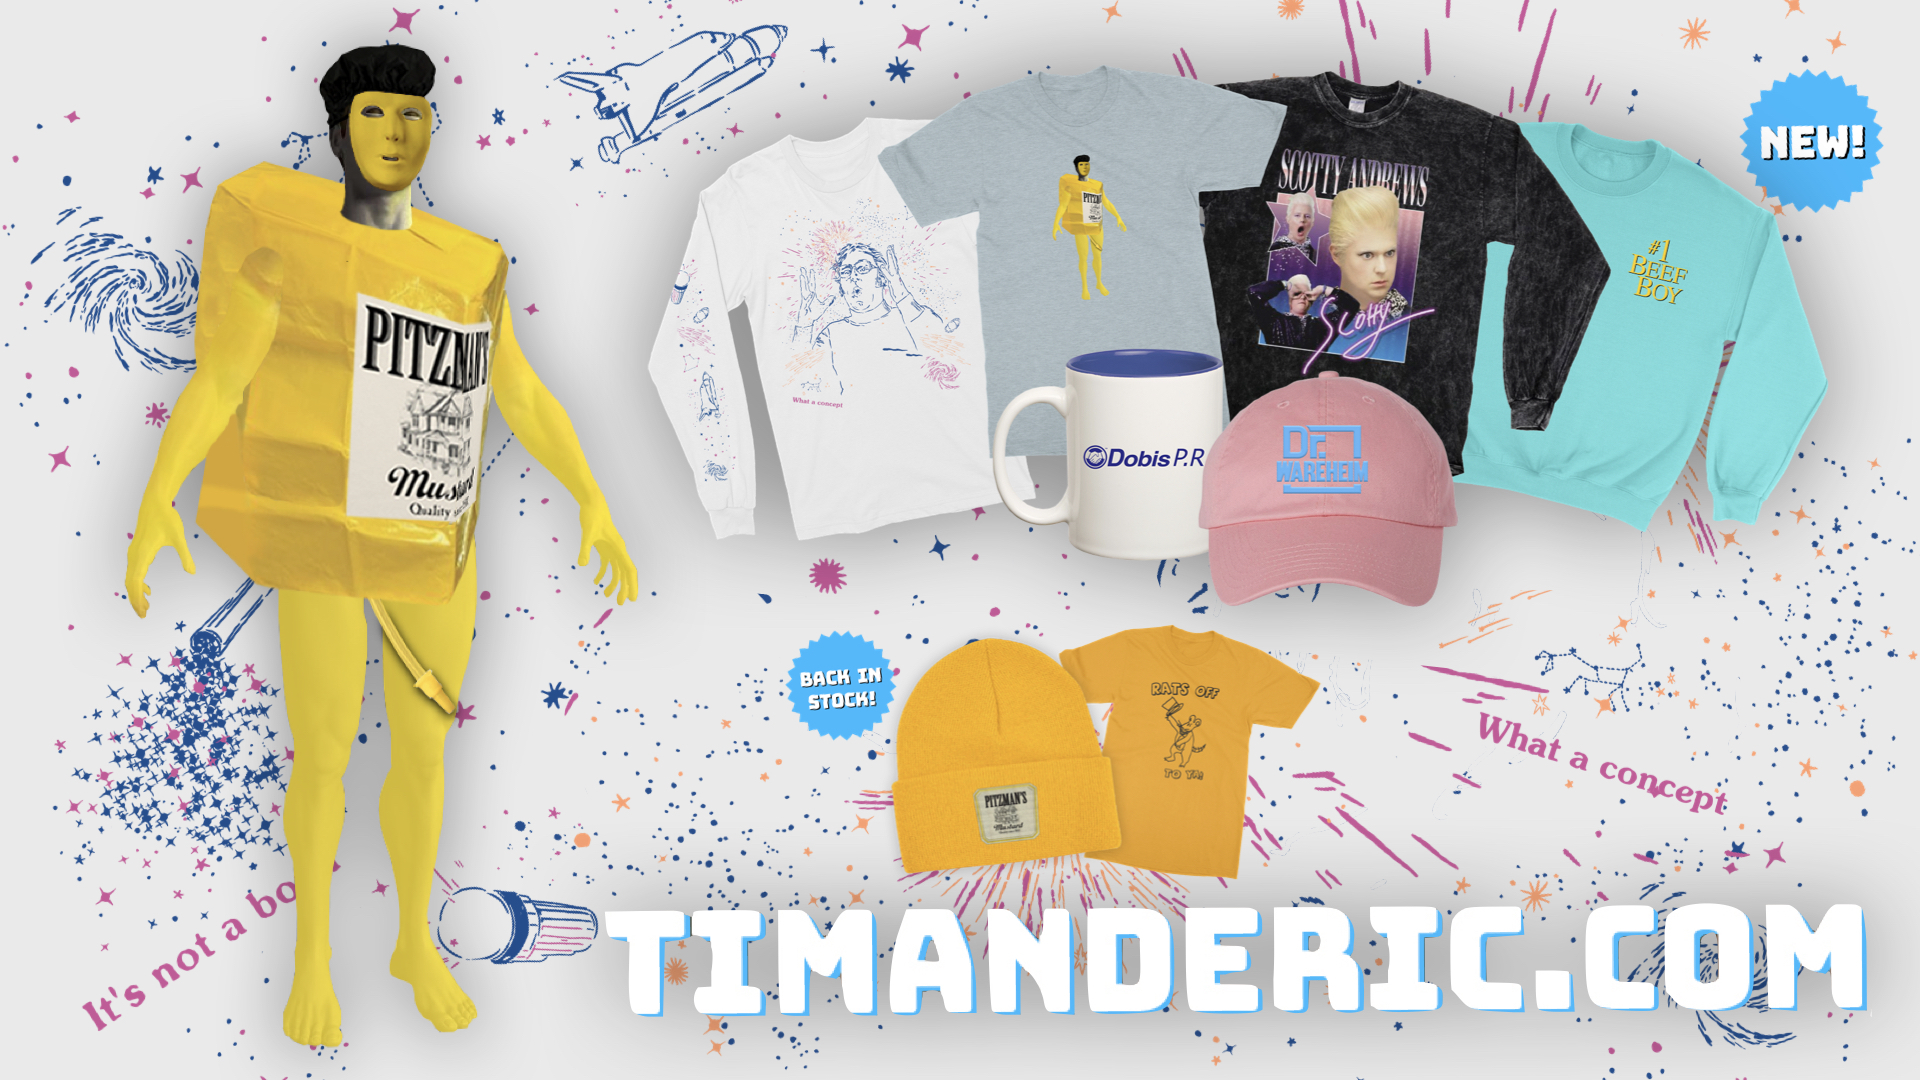 and Eric - News - Tim and Official Store